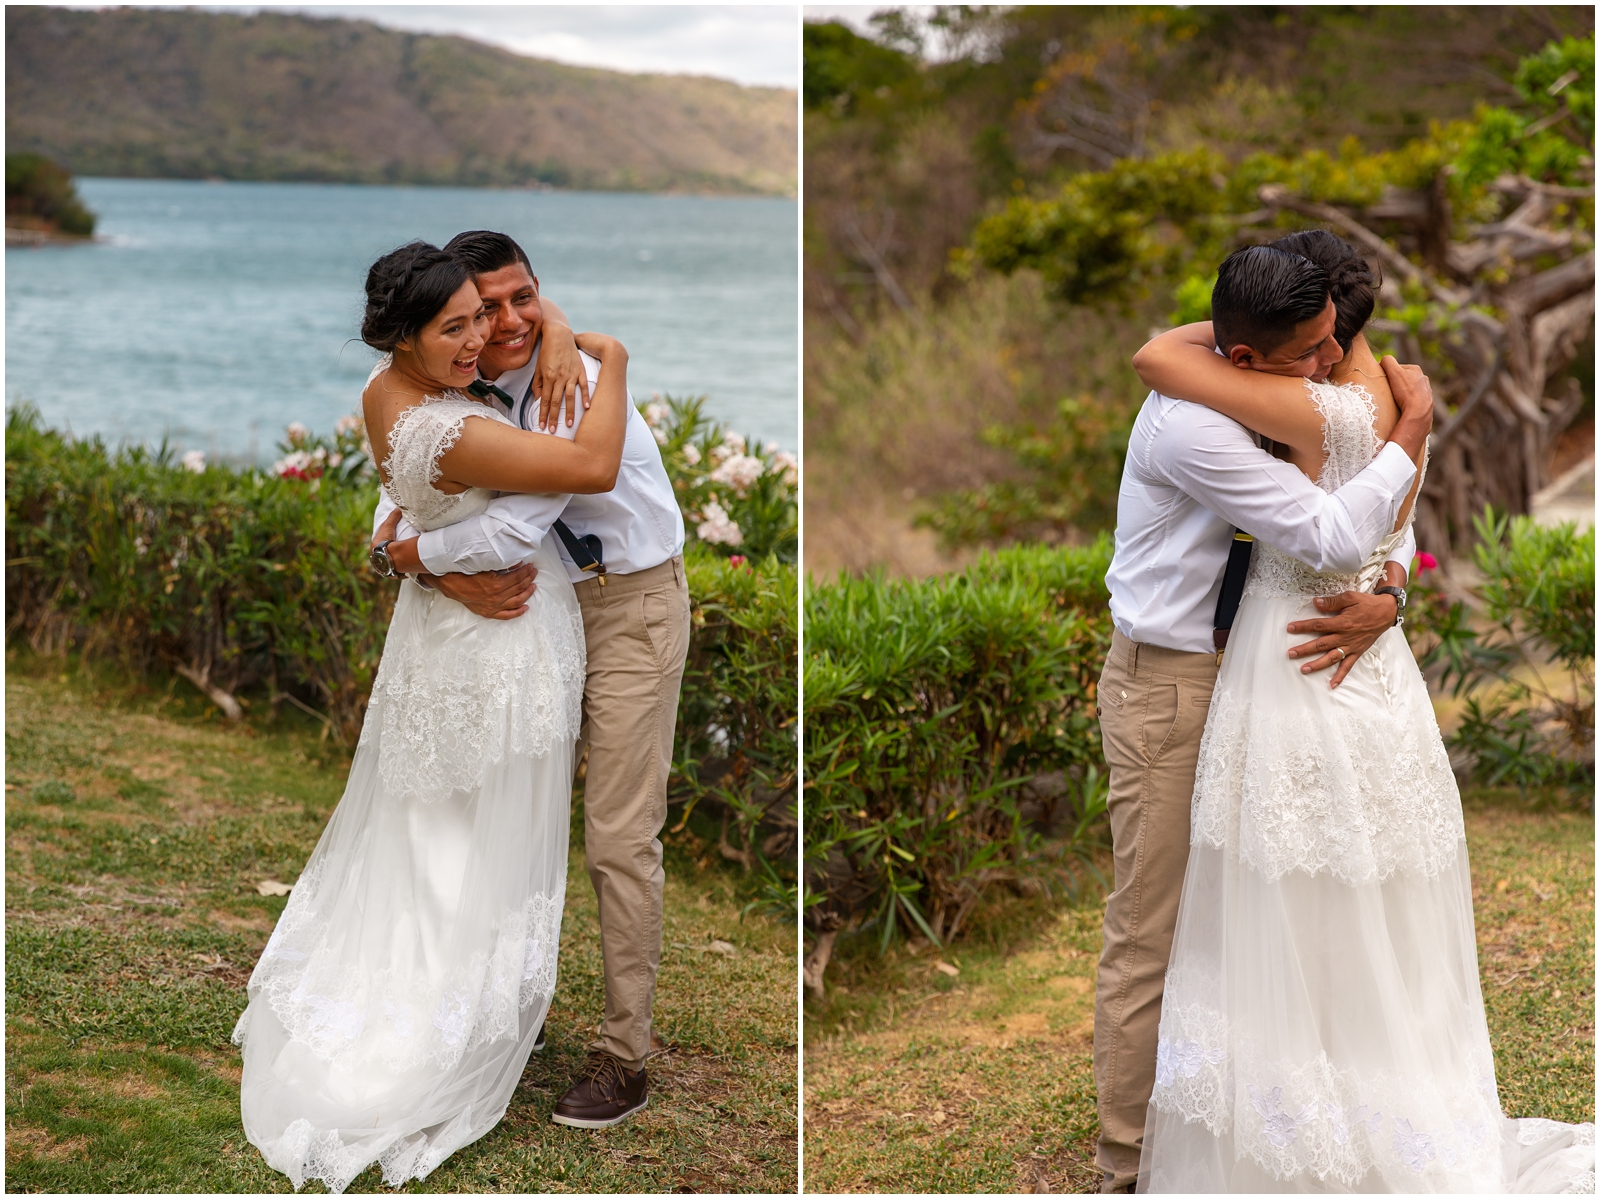 This couple got married on a lake in Nicaragua.